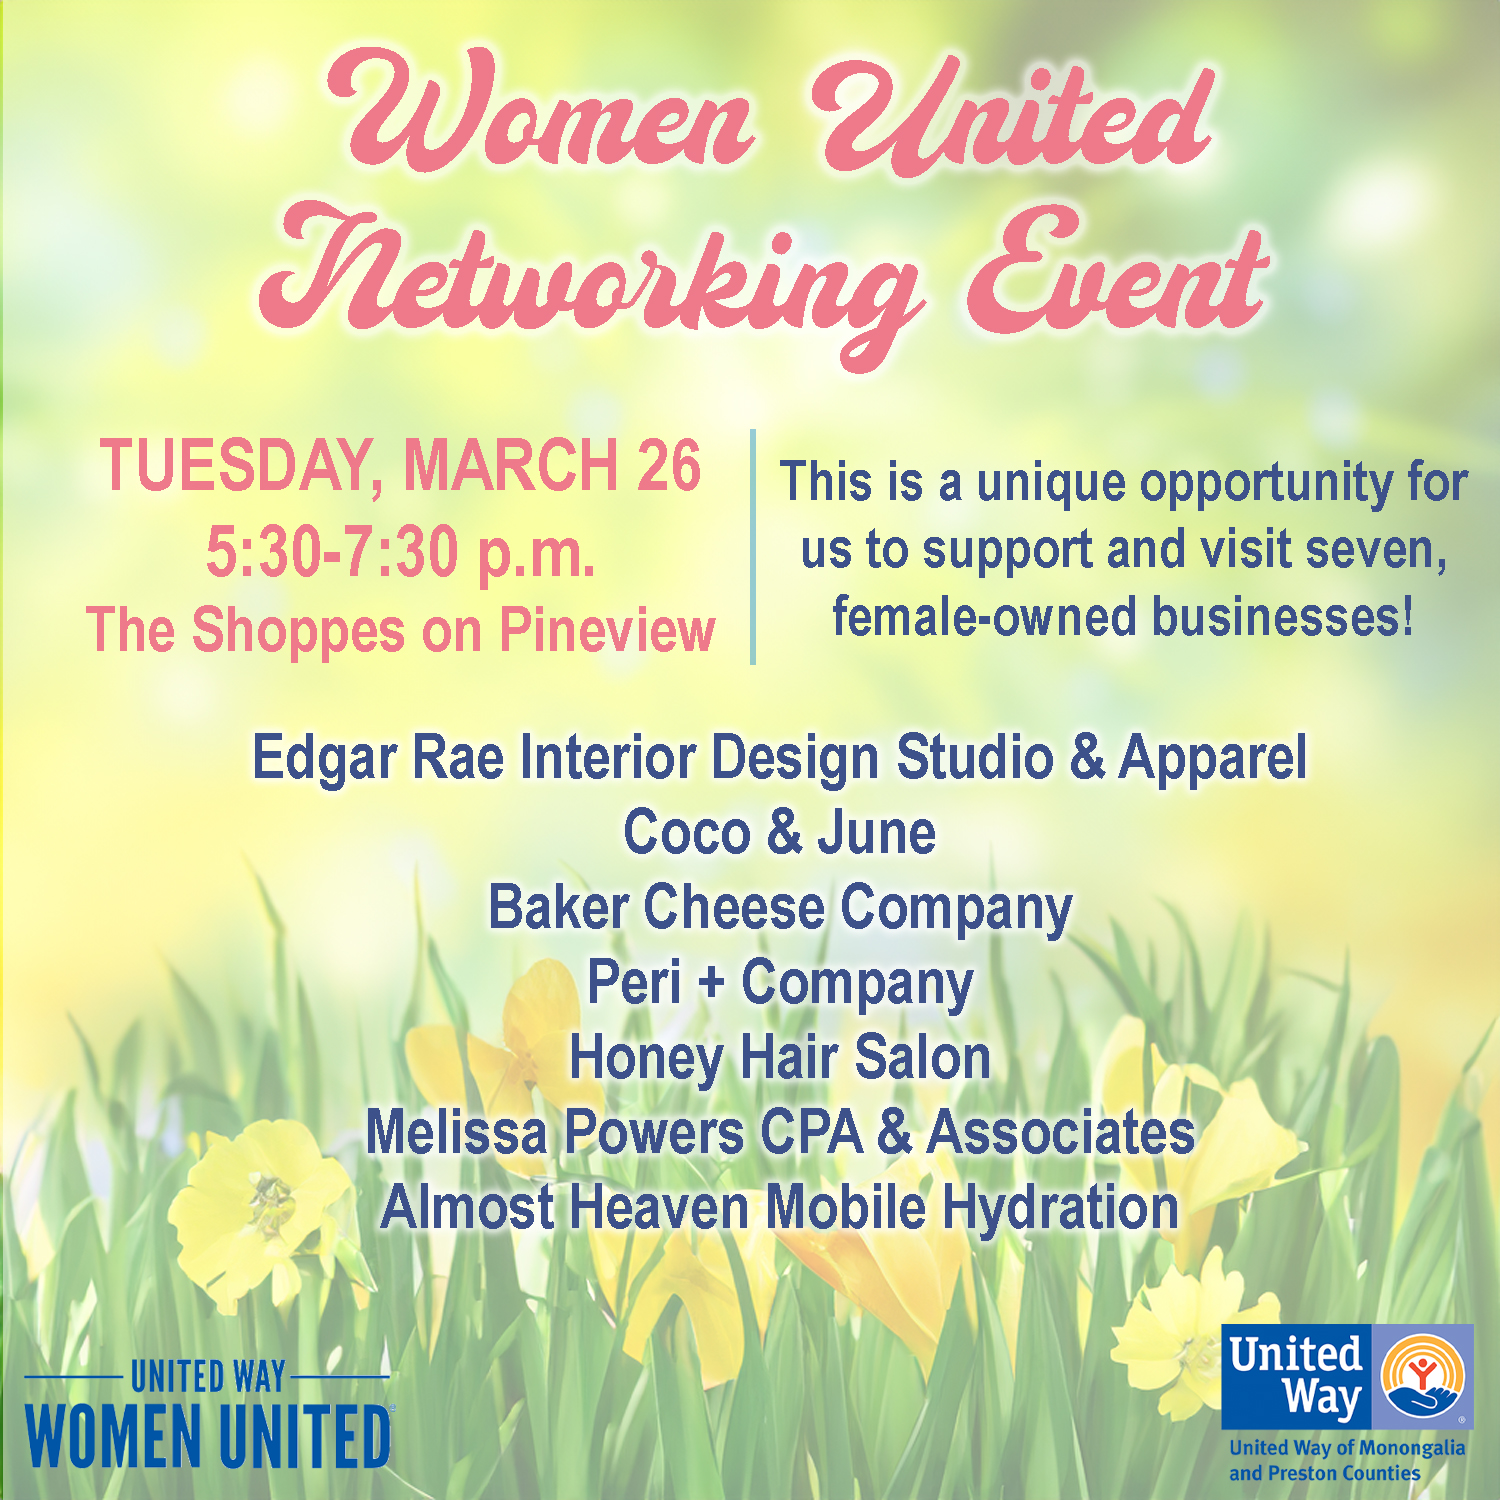 Women United Networking Event